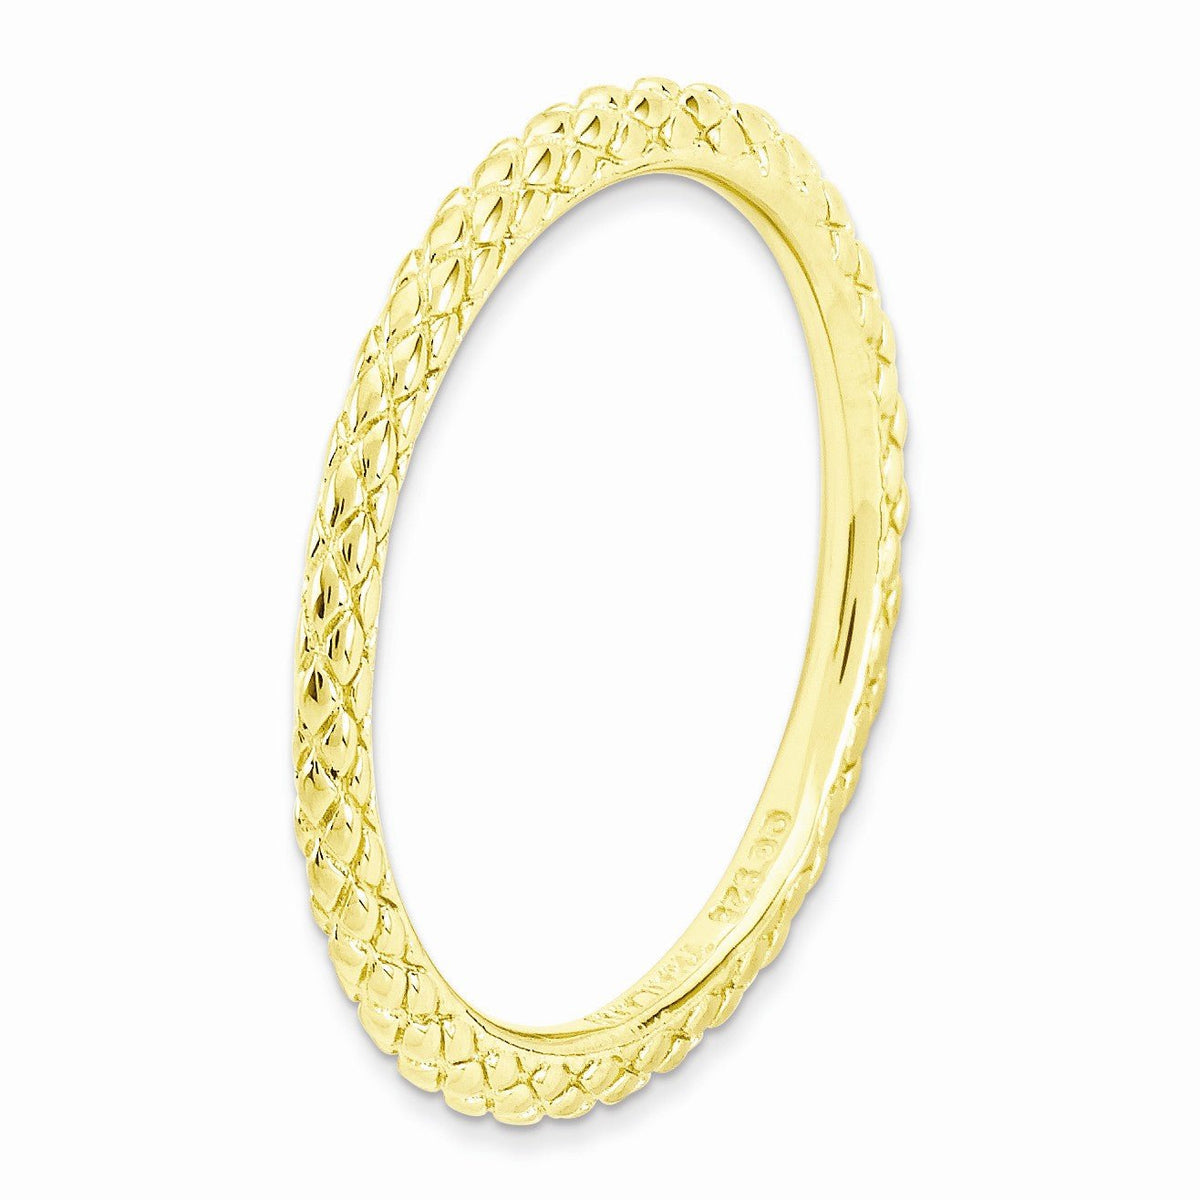 Alternate view of the 1.5mm Stackable 14K Yellow Gold Plated Silver Crisscross Band by The Black Bow Jewelry Co.